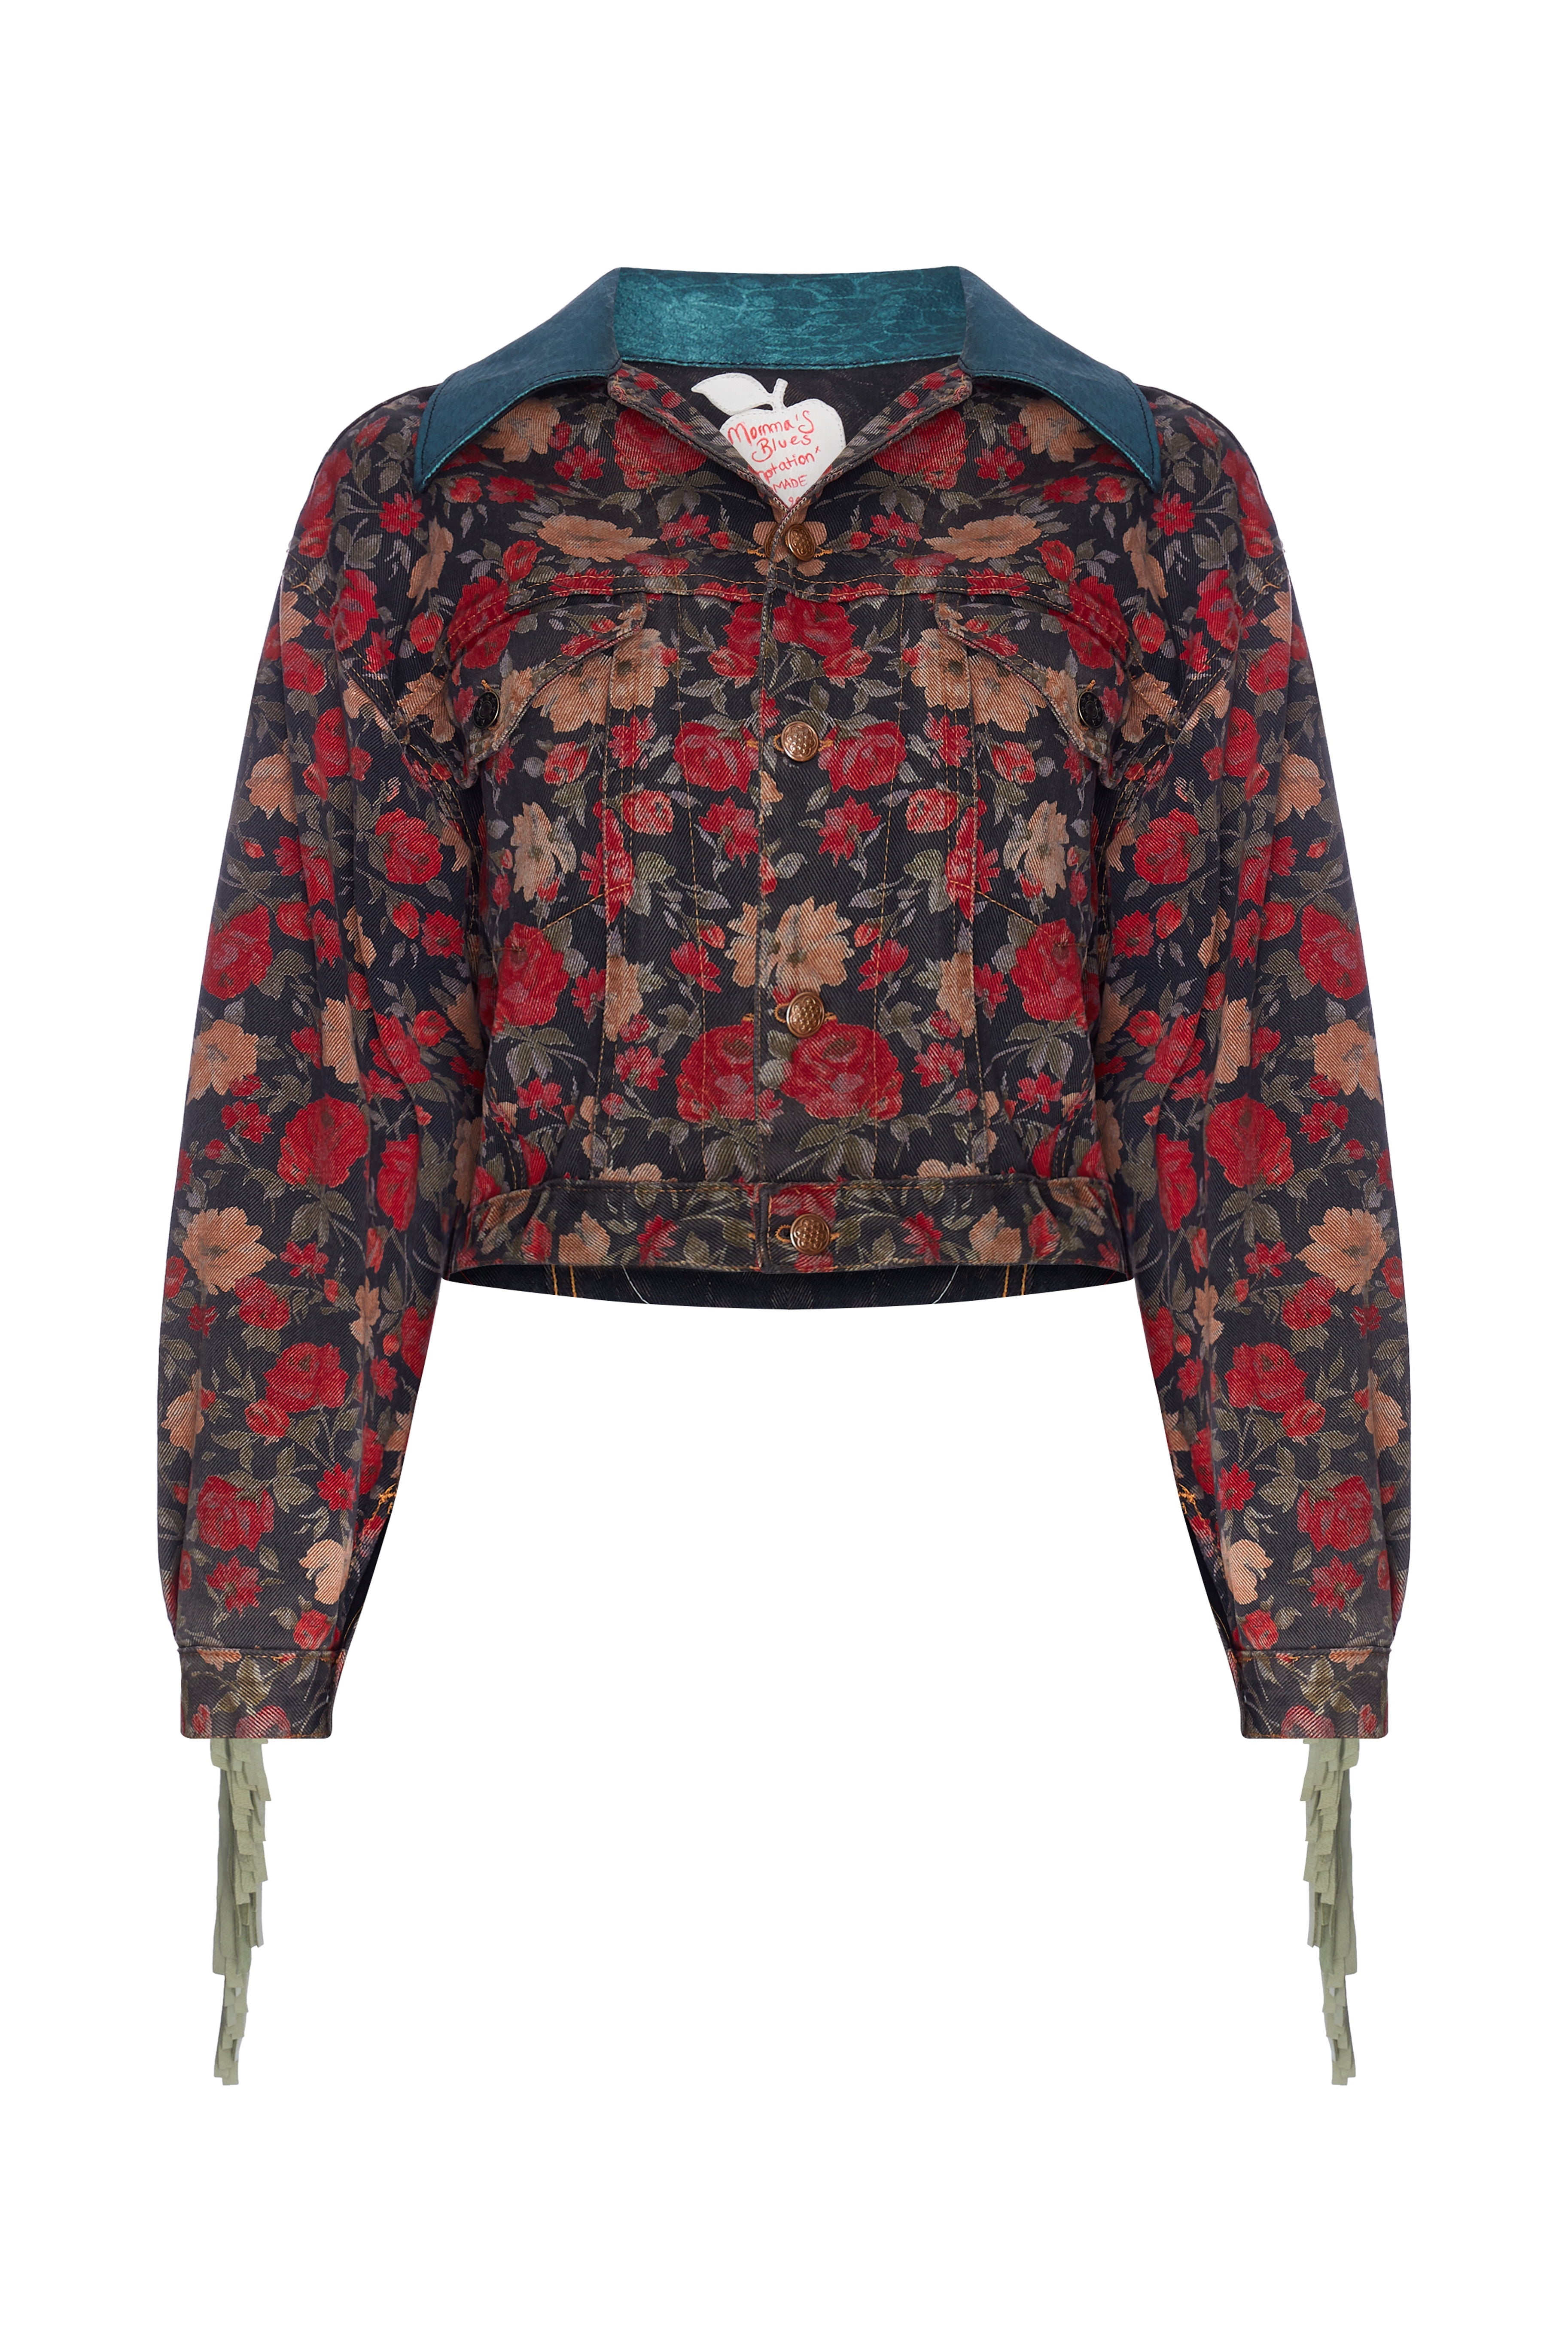 Temptation' Floral Fringed Jacket with Apple and Serpent